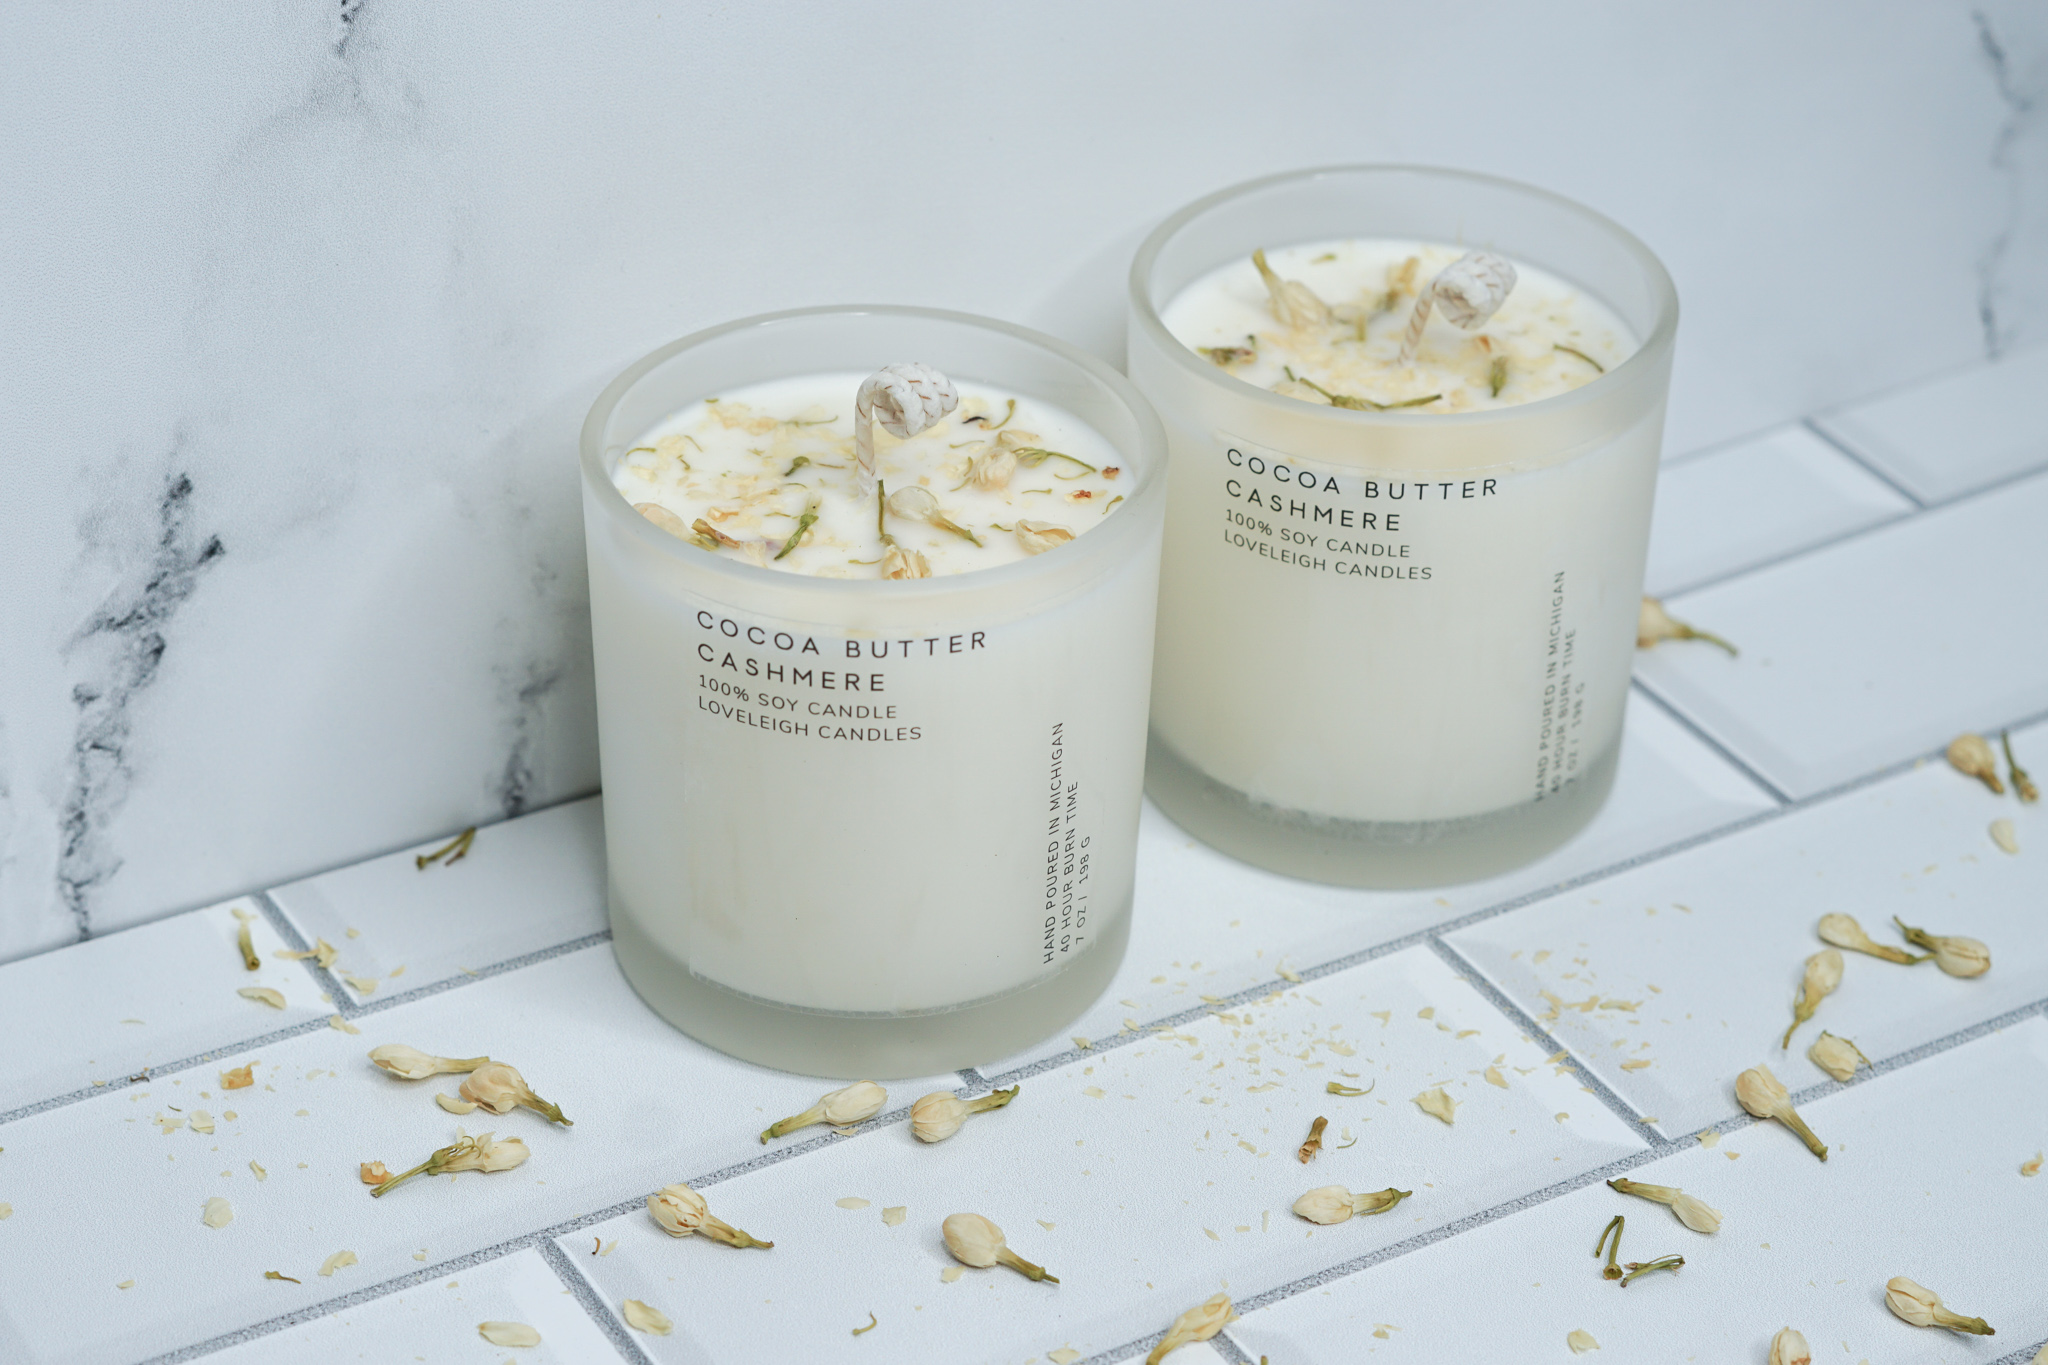 Cocoa Butter Cashmere  Wood Wick Candle - The Local Emporium